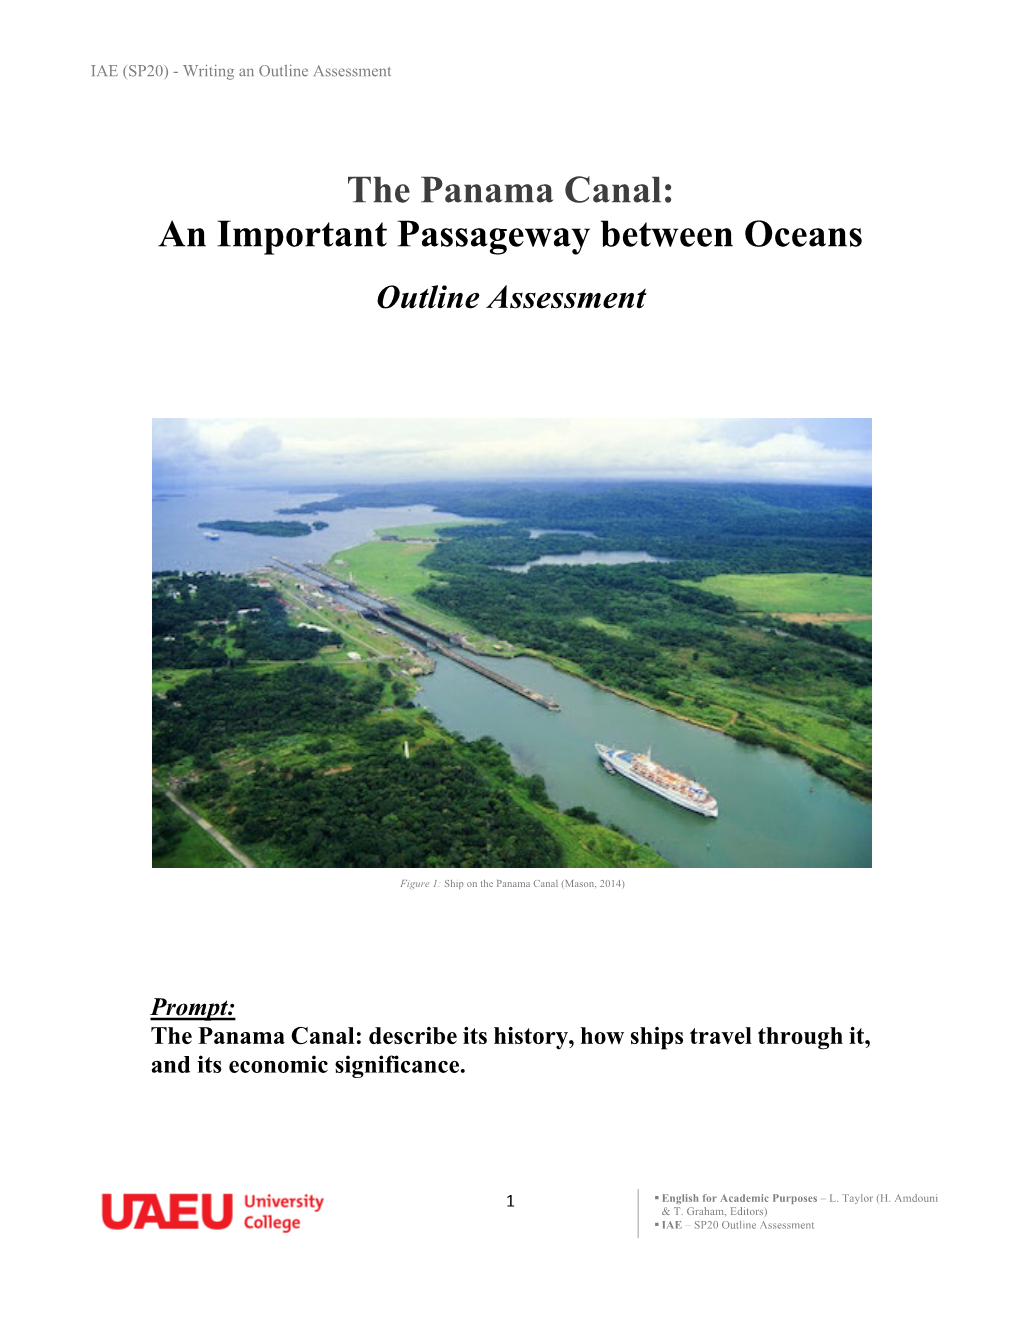 The Panama Canal: an Important Passageway Between Oceans Outline Assessment